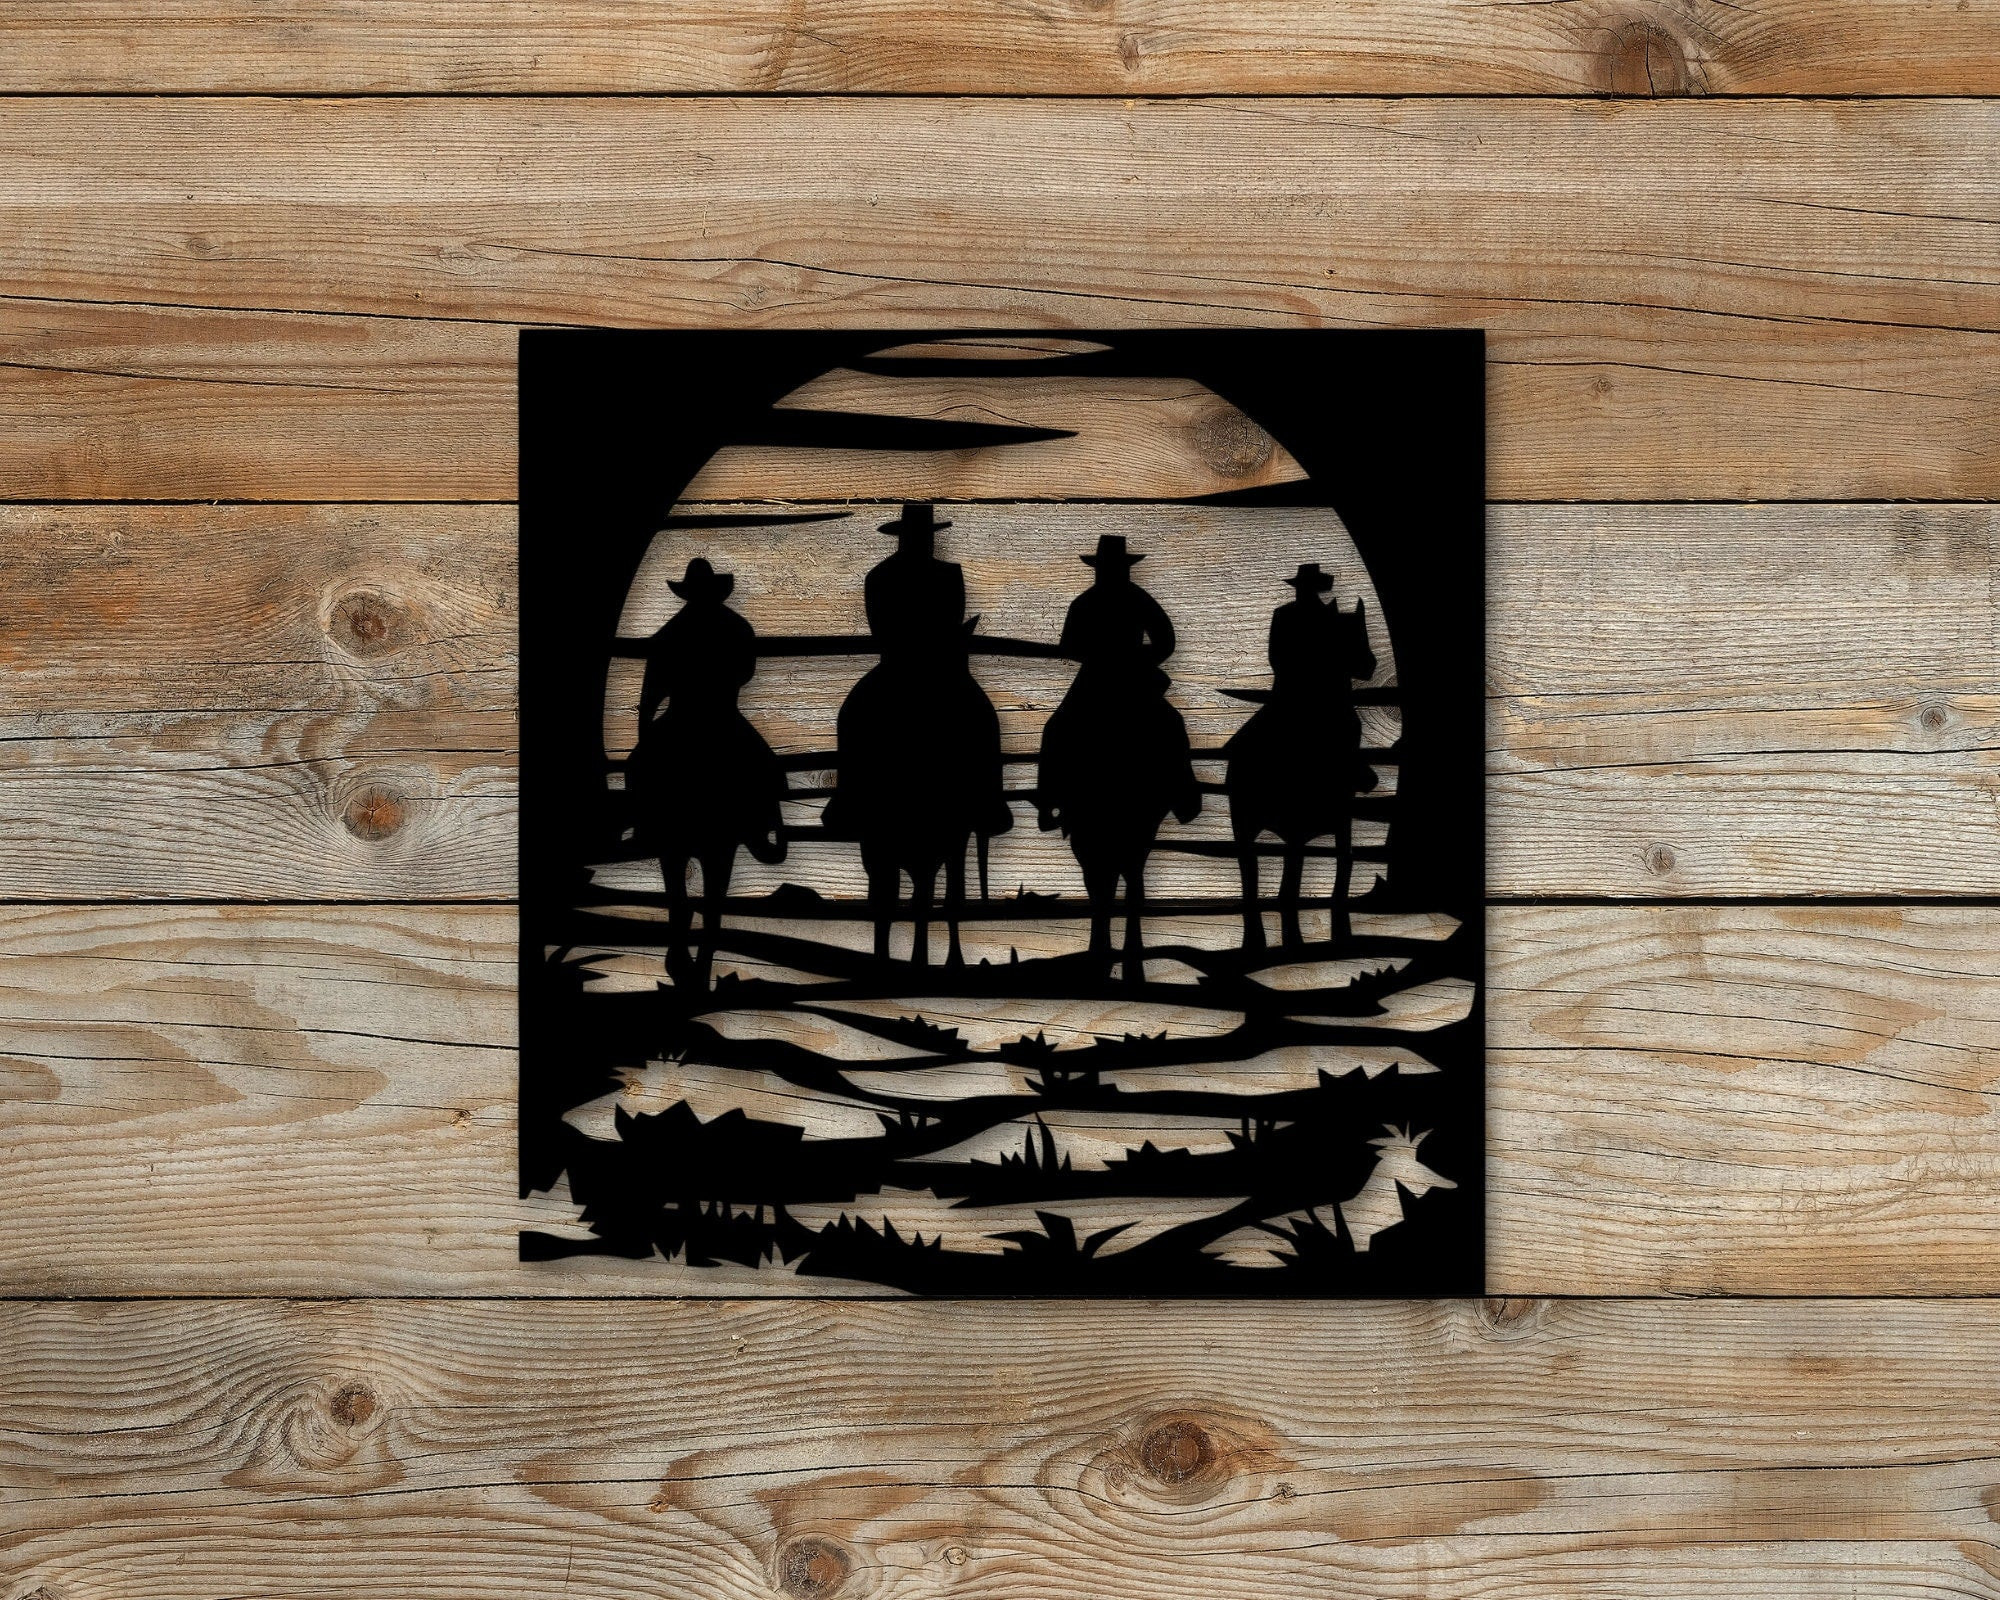 Cowboy Sign, Personalized Metal Cowboy Sign, Western Sign, Mounted Cowboy Sign, Cowboy Sunset Sign, Cowboy Wall Decor, Ranch Sign, Western, Laser Cut Metal Signs Custom Gift Ideas 14x14IN